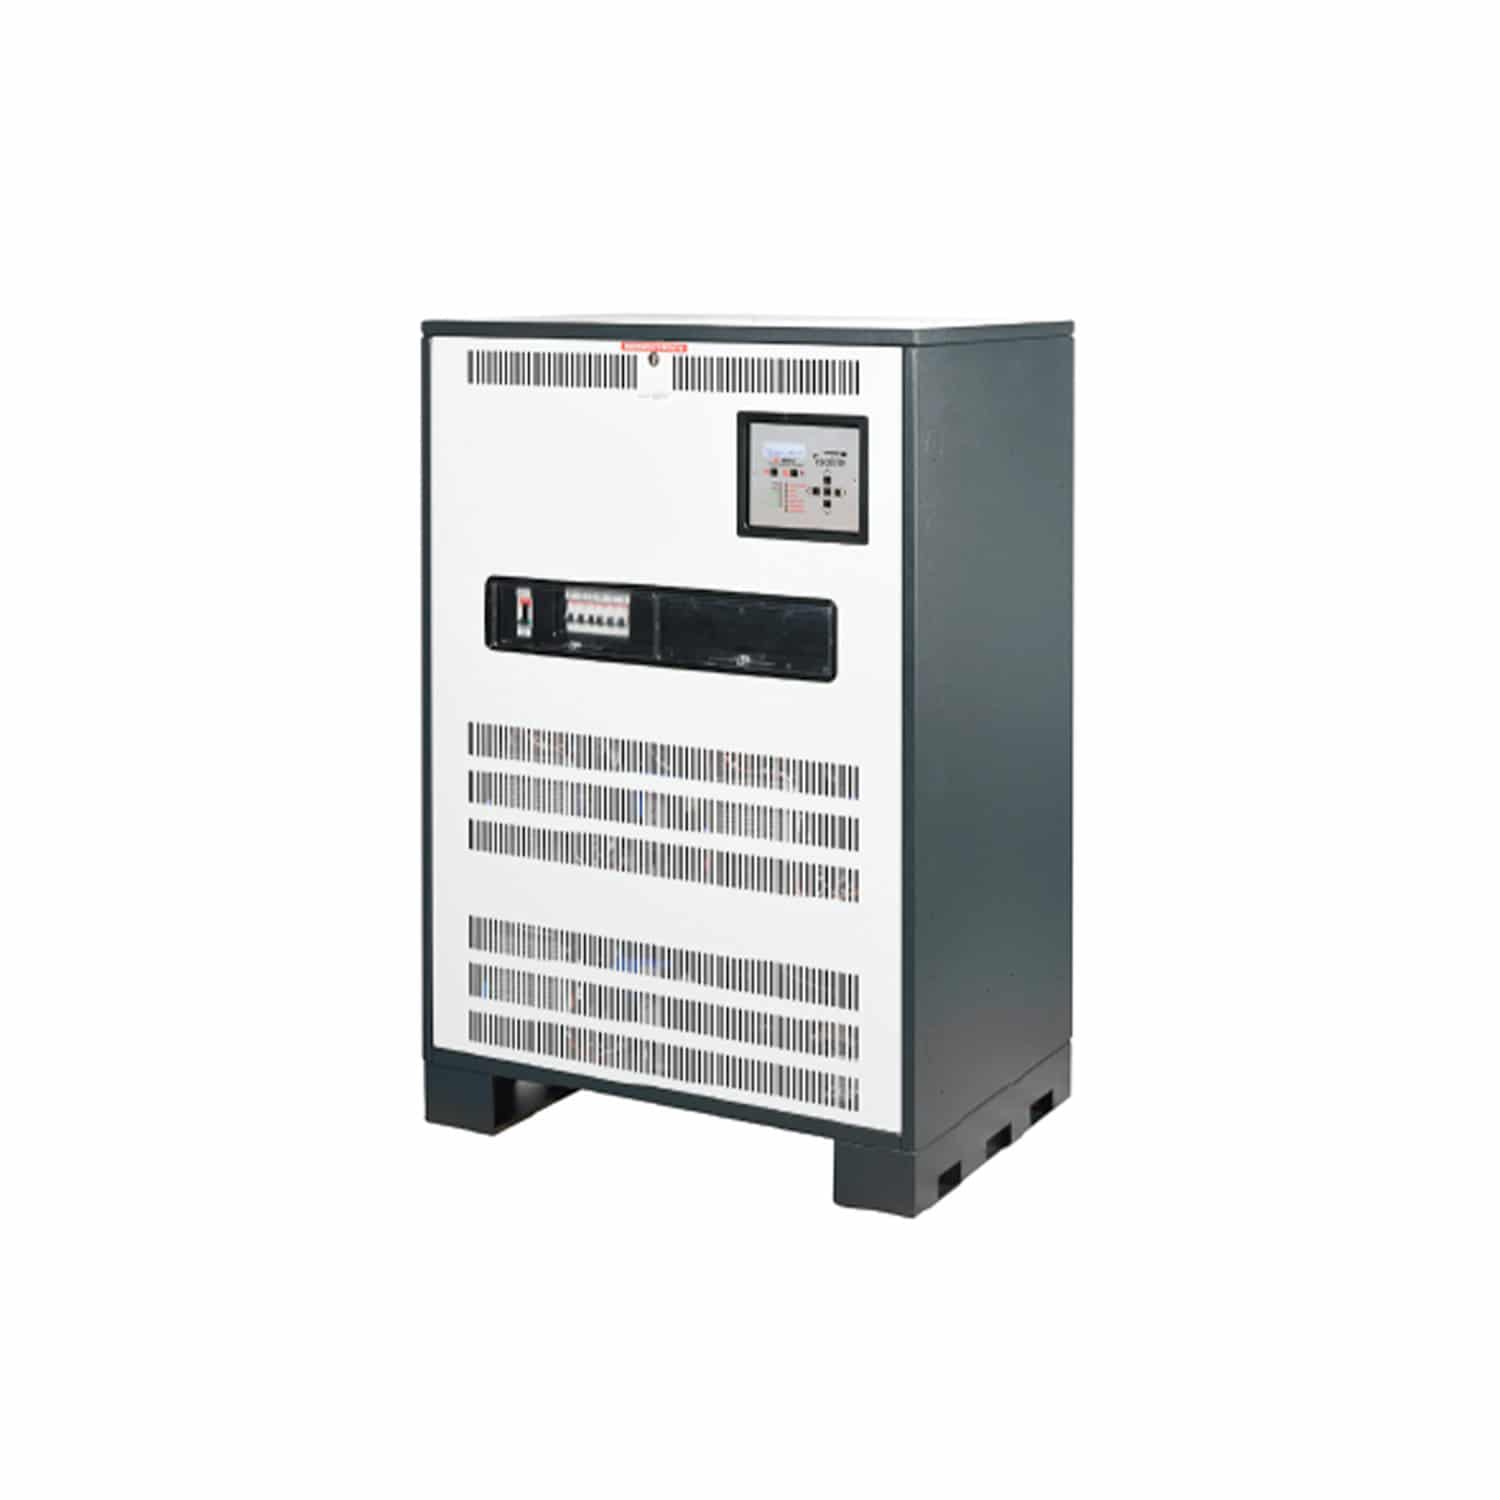 E3MAC-2P 2,200 -12,500 VA Two Phase Modular AC Inverter provides pure sine wave output with less than 3% THD.